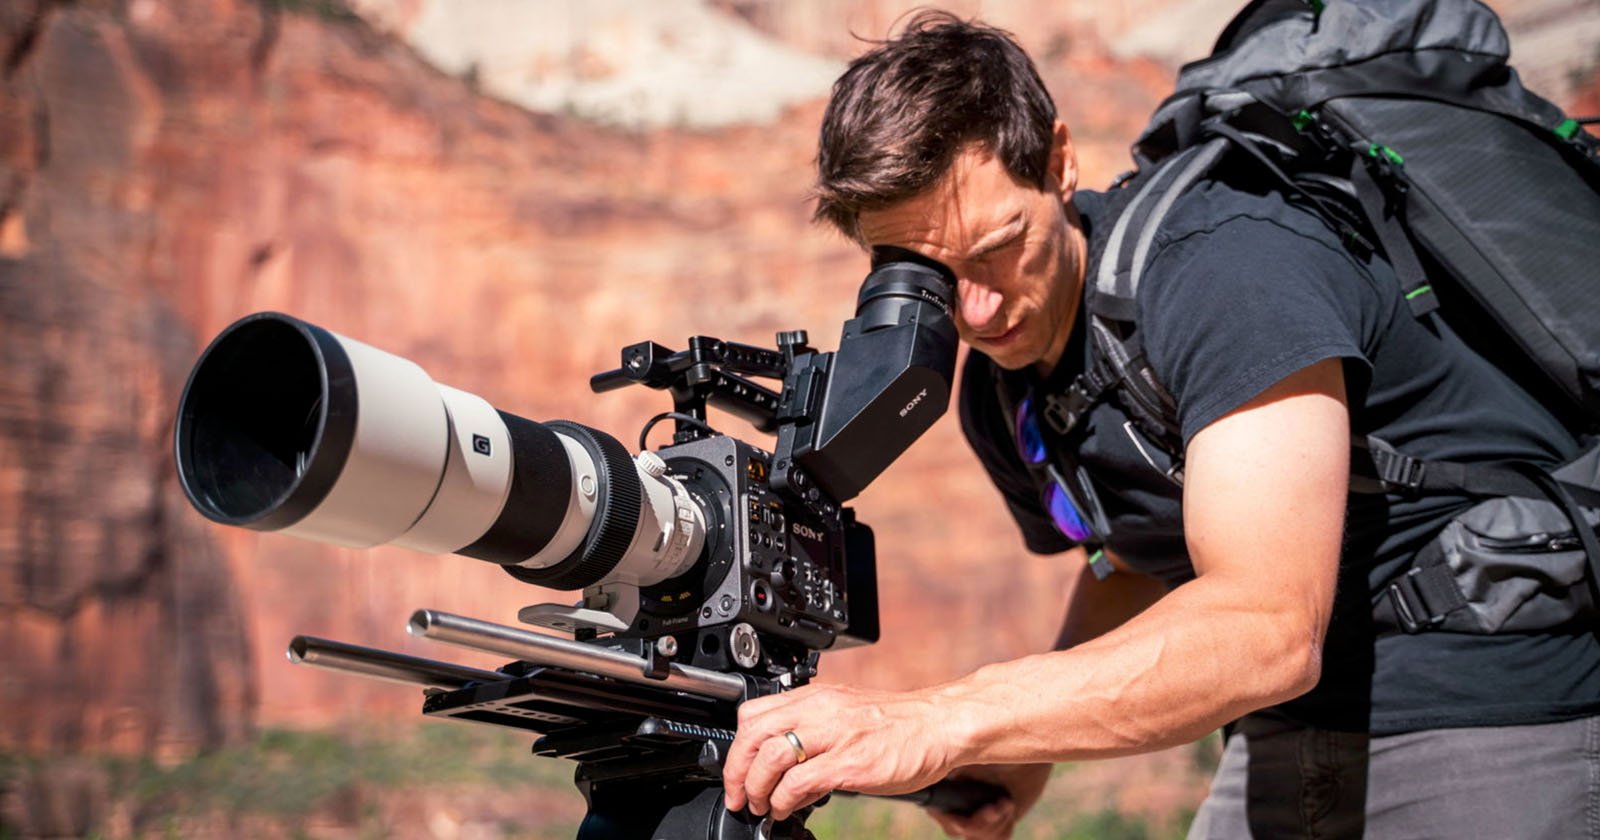 Sonys $25,000 Burano Cine Camera Offers 8K Video and Venice Colors